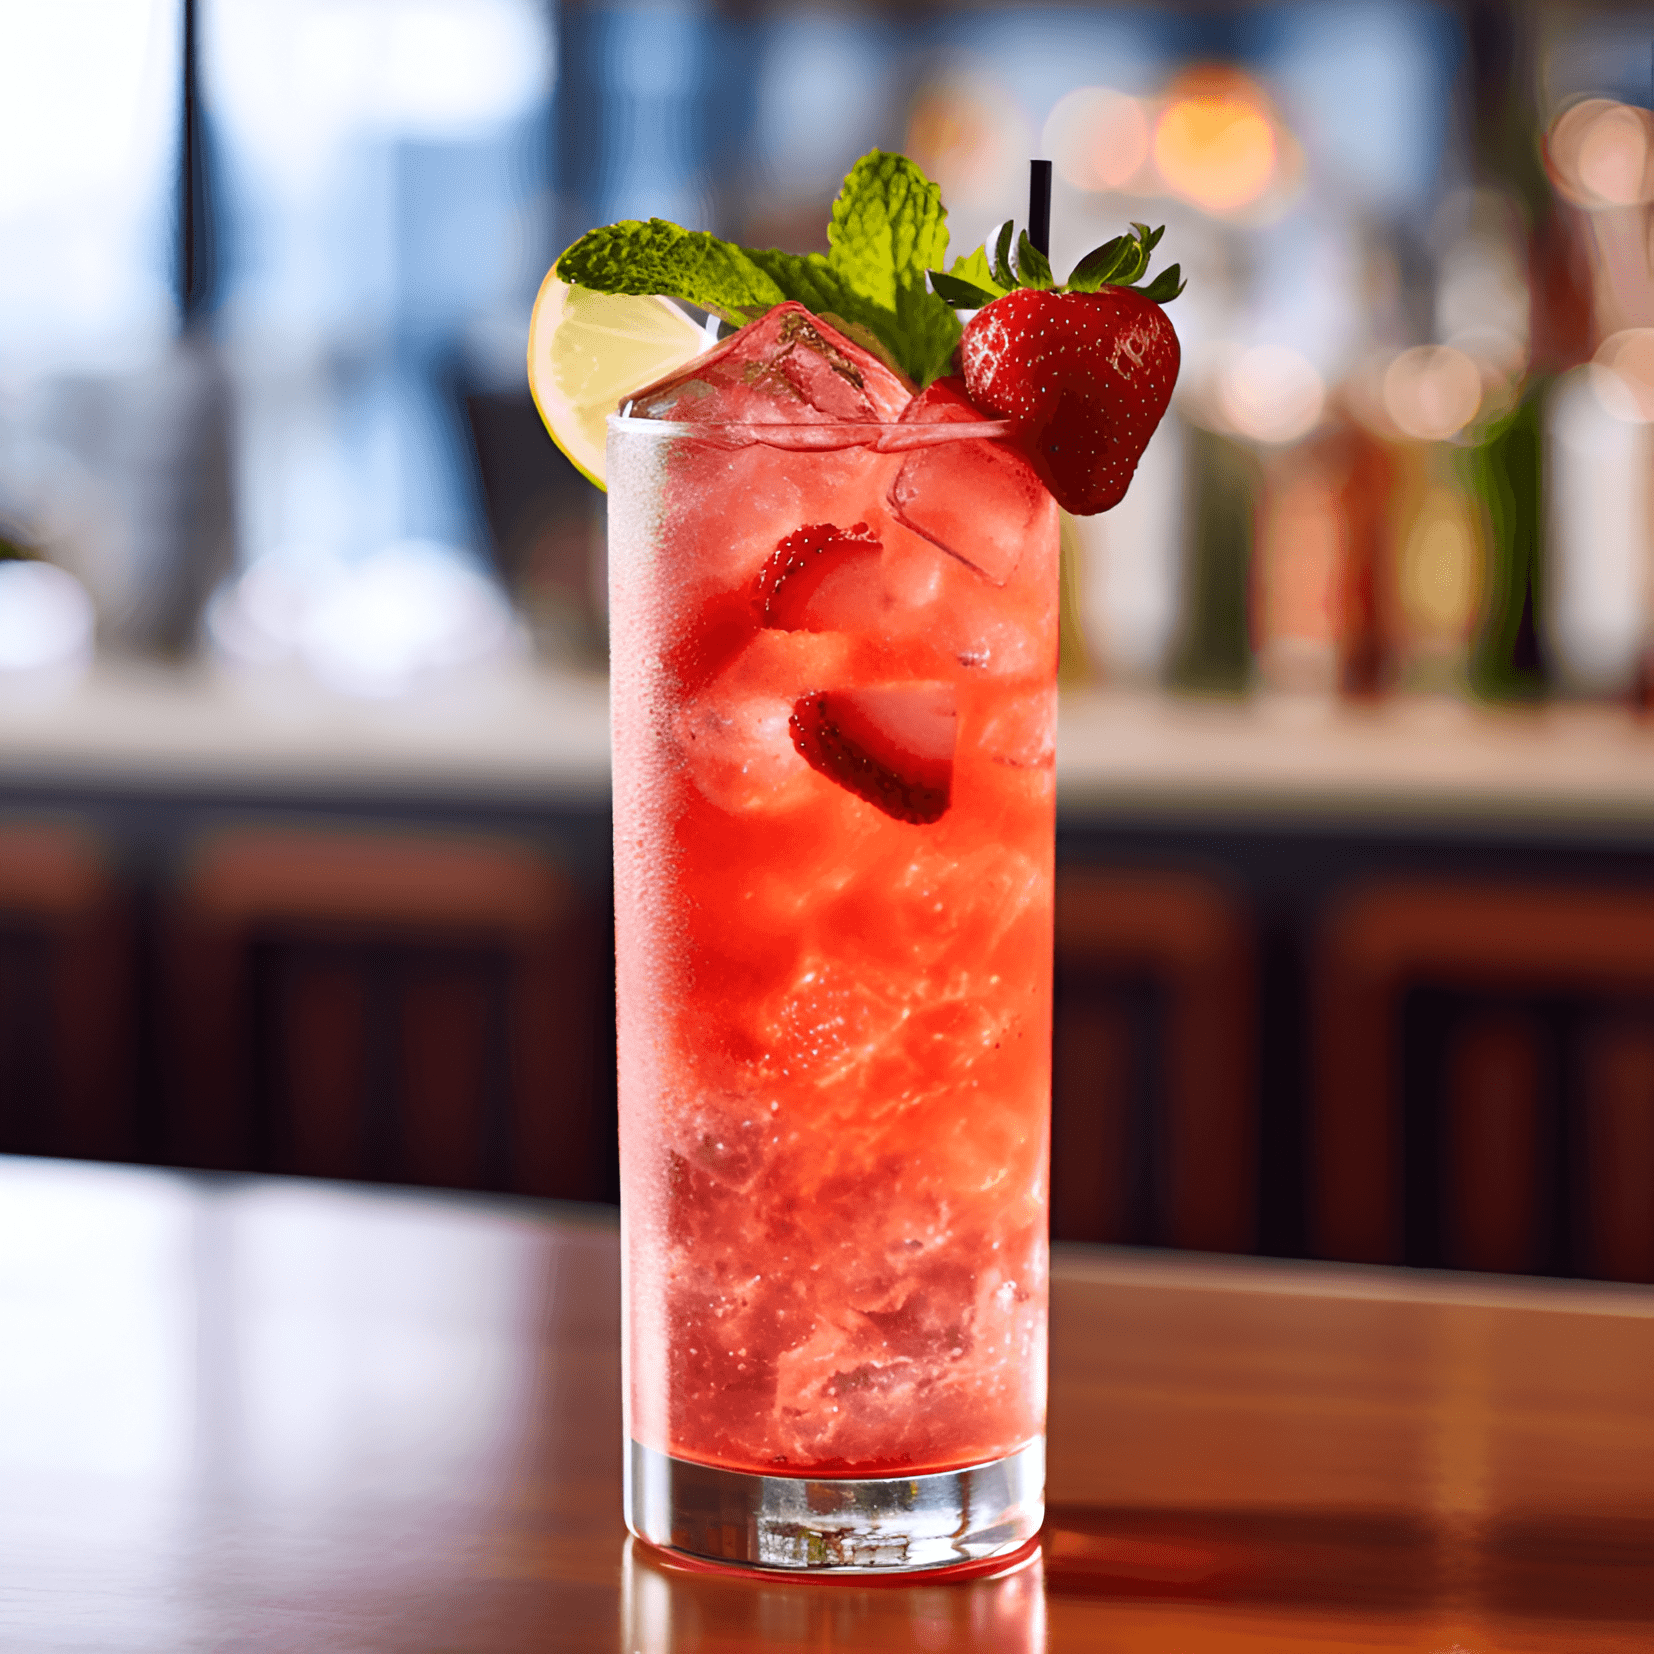 Strawberry Fizz Cocktail Recipe - The Strawberry Fizz is a delightful combination of sweet, sour, and slightly tangy flavors. The fresh strawberries provide a natural sweetness, while the lemon juice adds a zesty sourness. The gin and club soda give the cocktail a light and refreshing taste, with a subtle hint of botanicals.